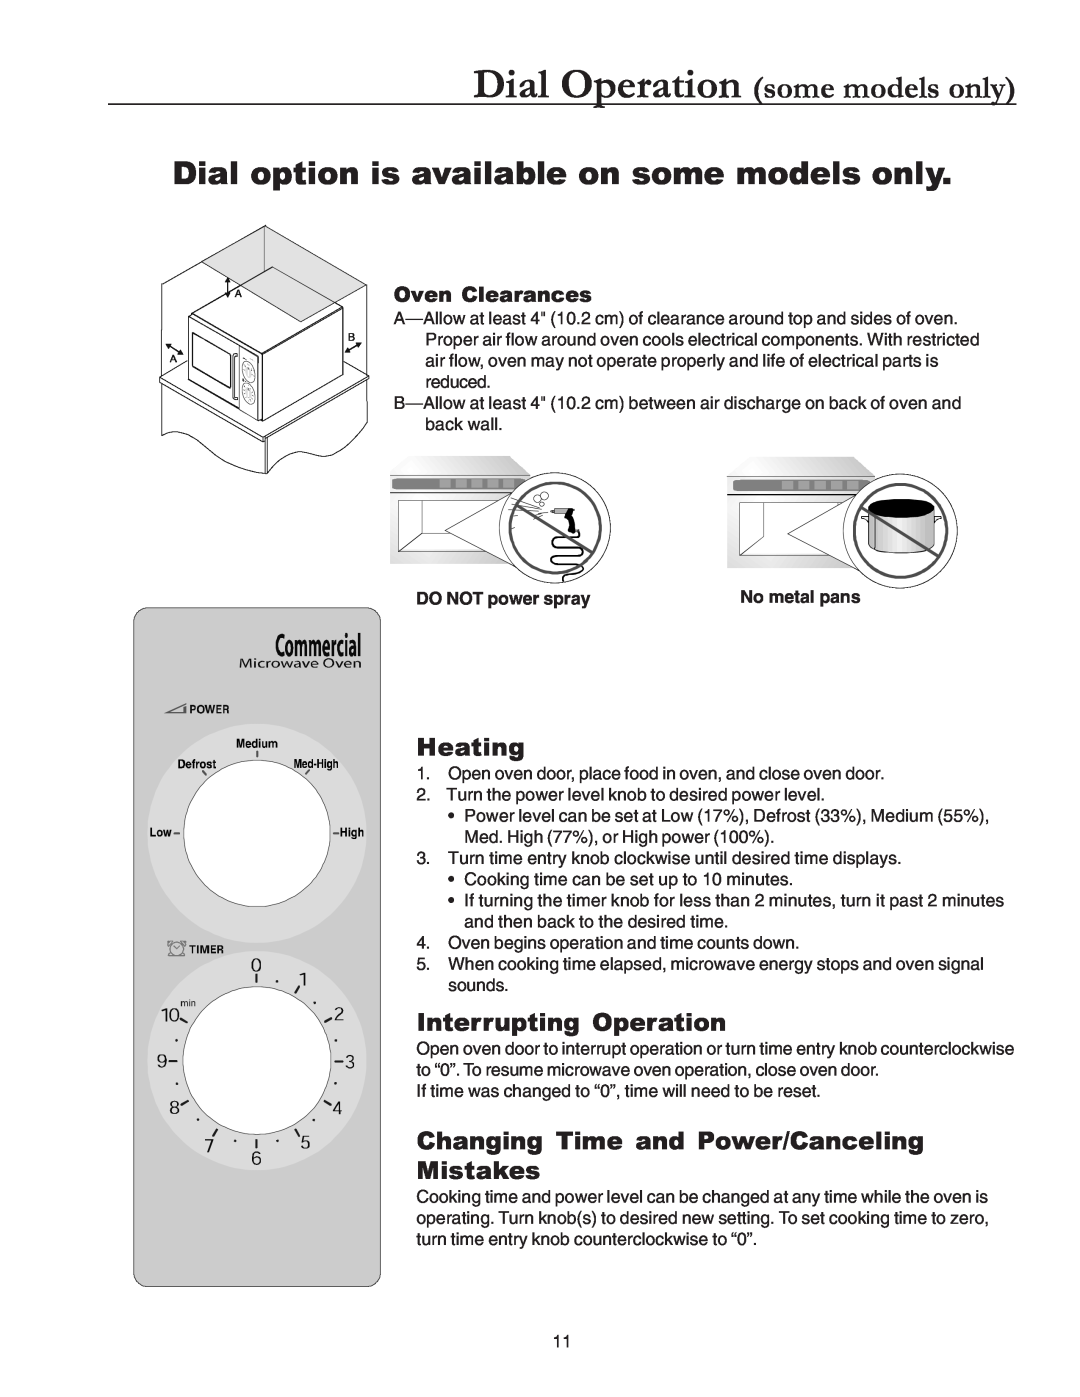 Amana Commercial Microwave Oven Dial Operation some models only, Heating, Interrupting Operation, Oven Clearances 